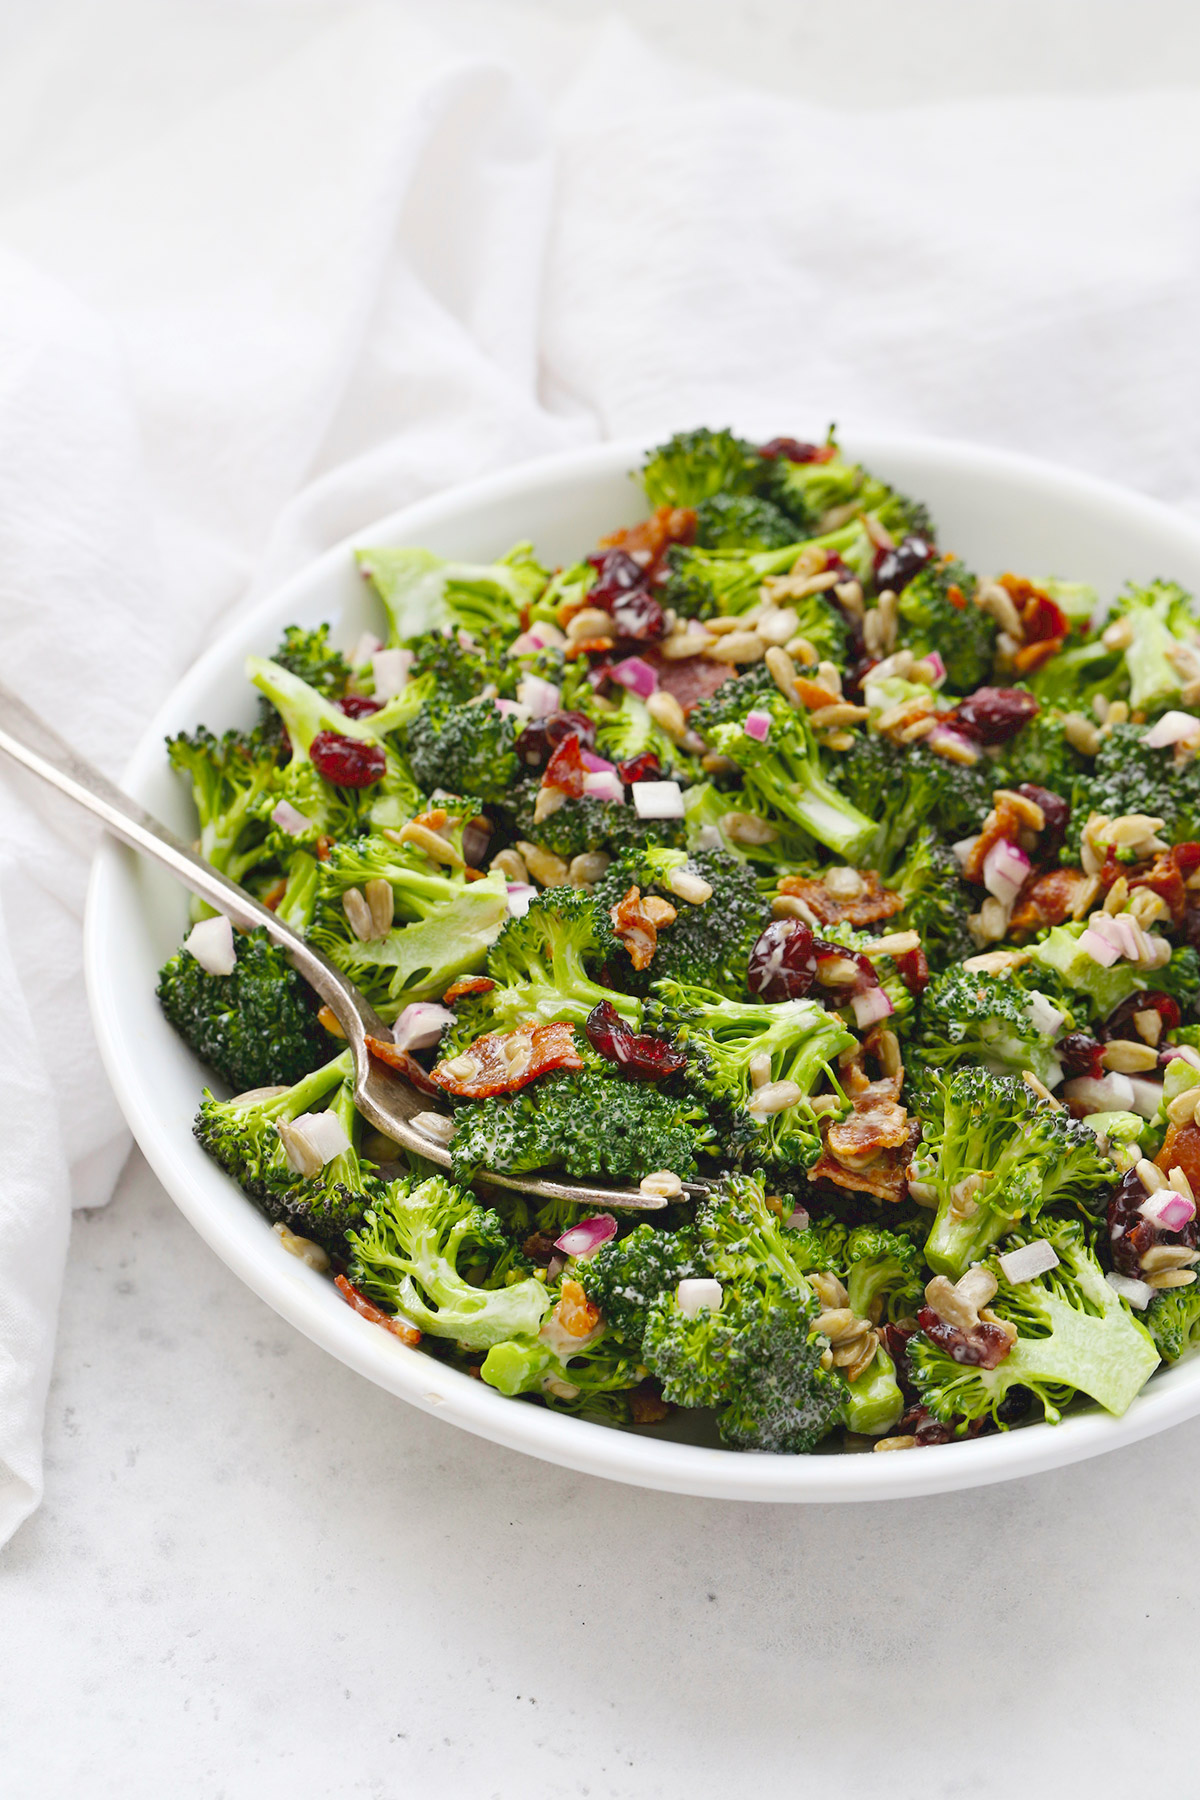 Broccoli Bacon Salad from One Lovely Life